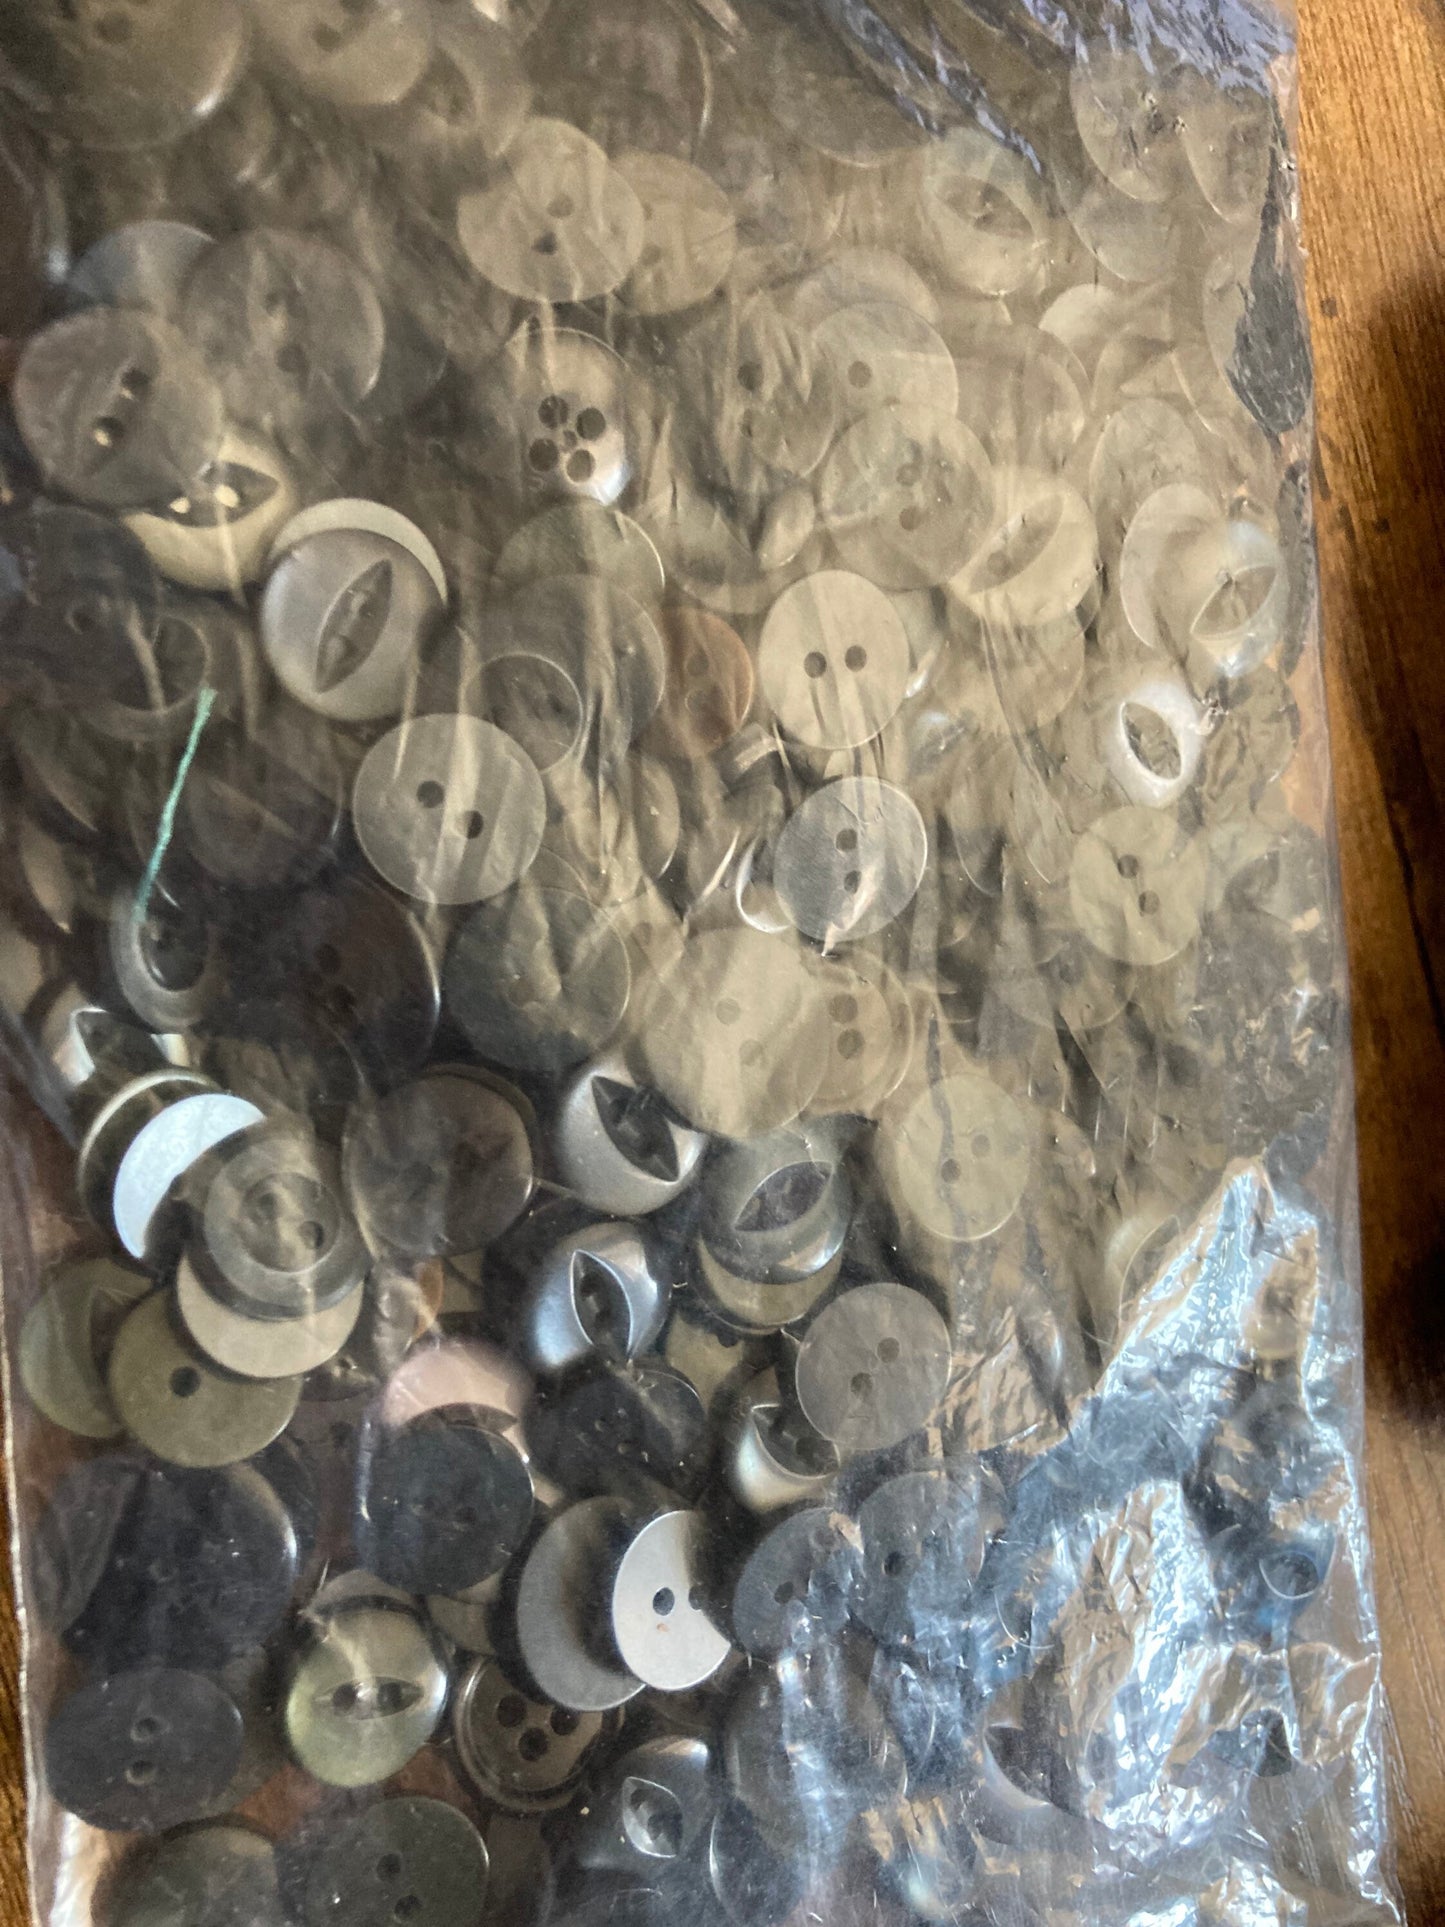 Job lot mixed size plastic buttons in dark blue grey navy blue many vintage retro lots listed approx 160 gms